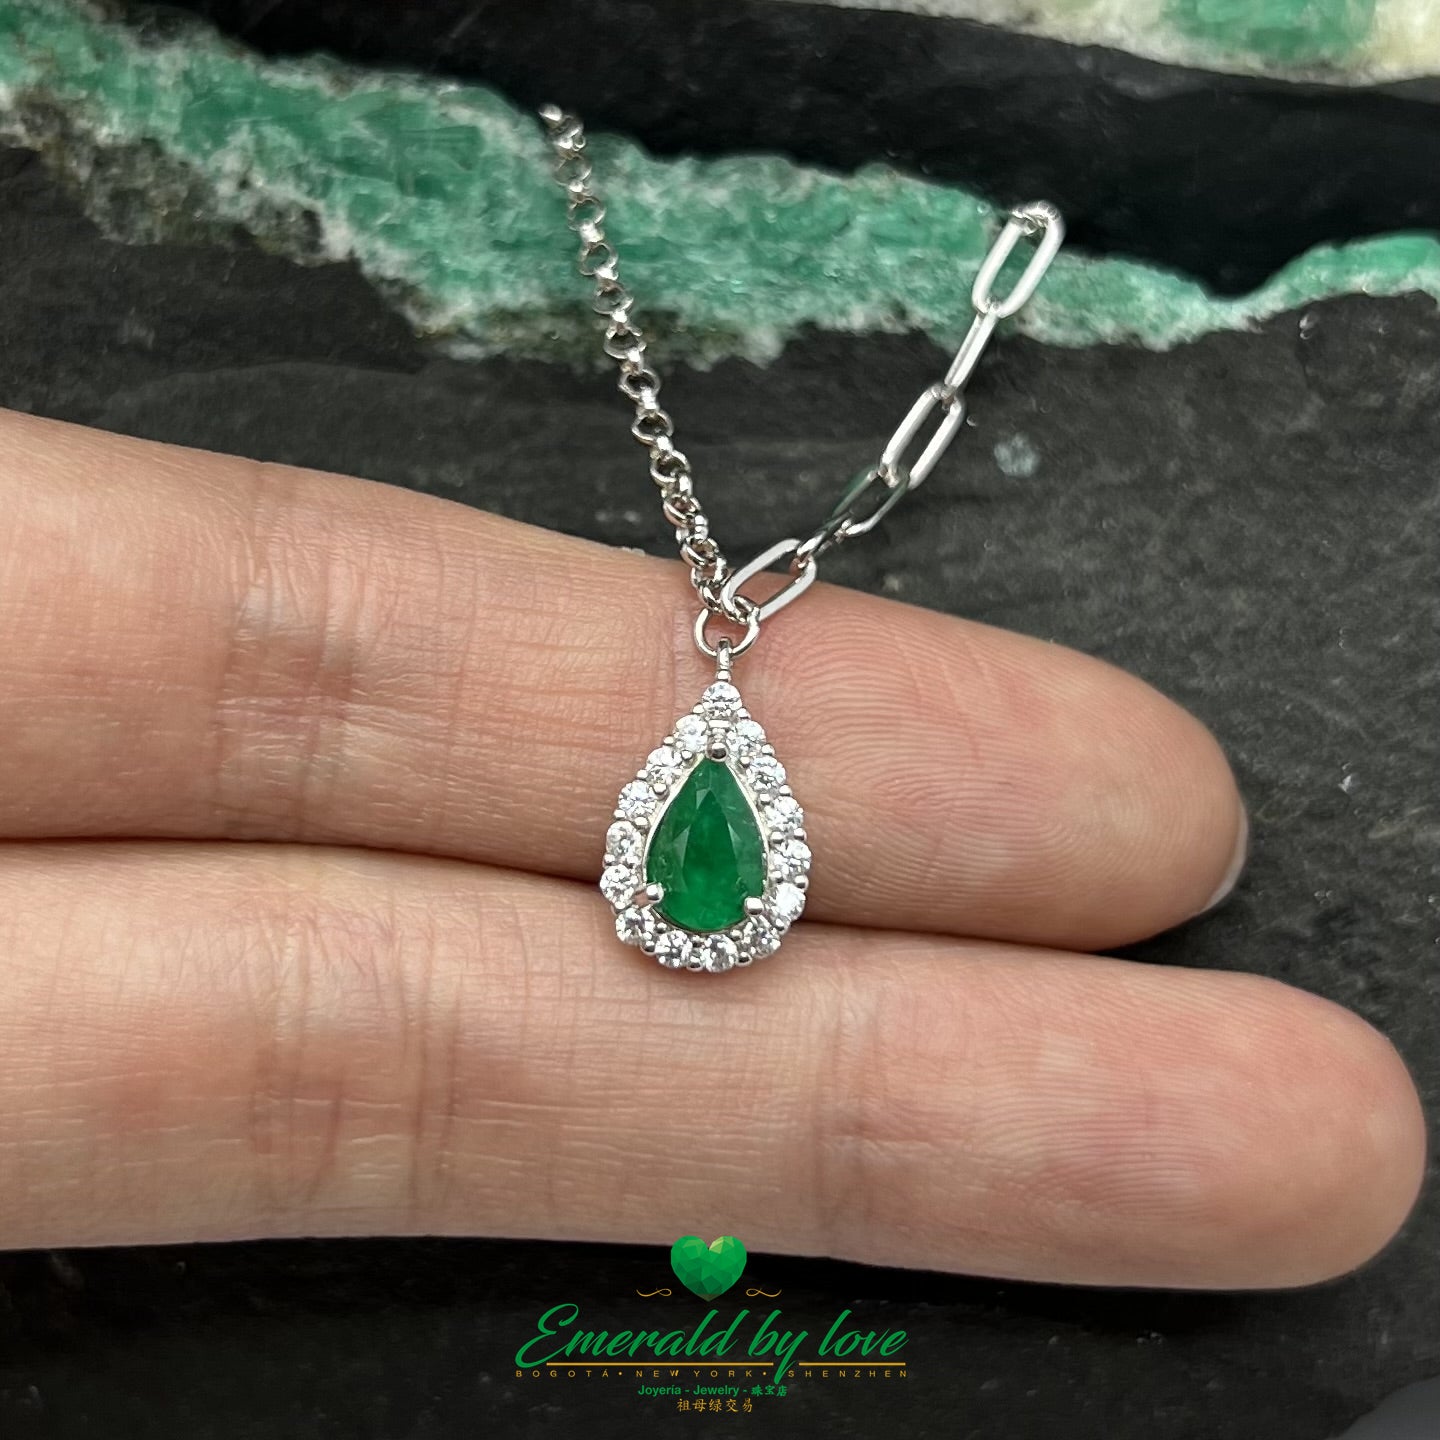 Pear-Shaped Marquise Emerald Pendant with Surrounding Cubic Zirconia and Double Chain